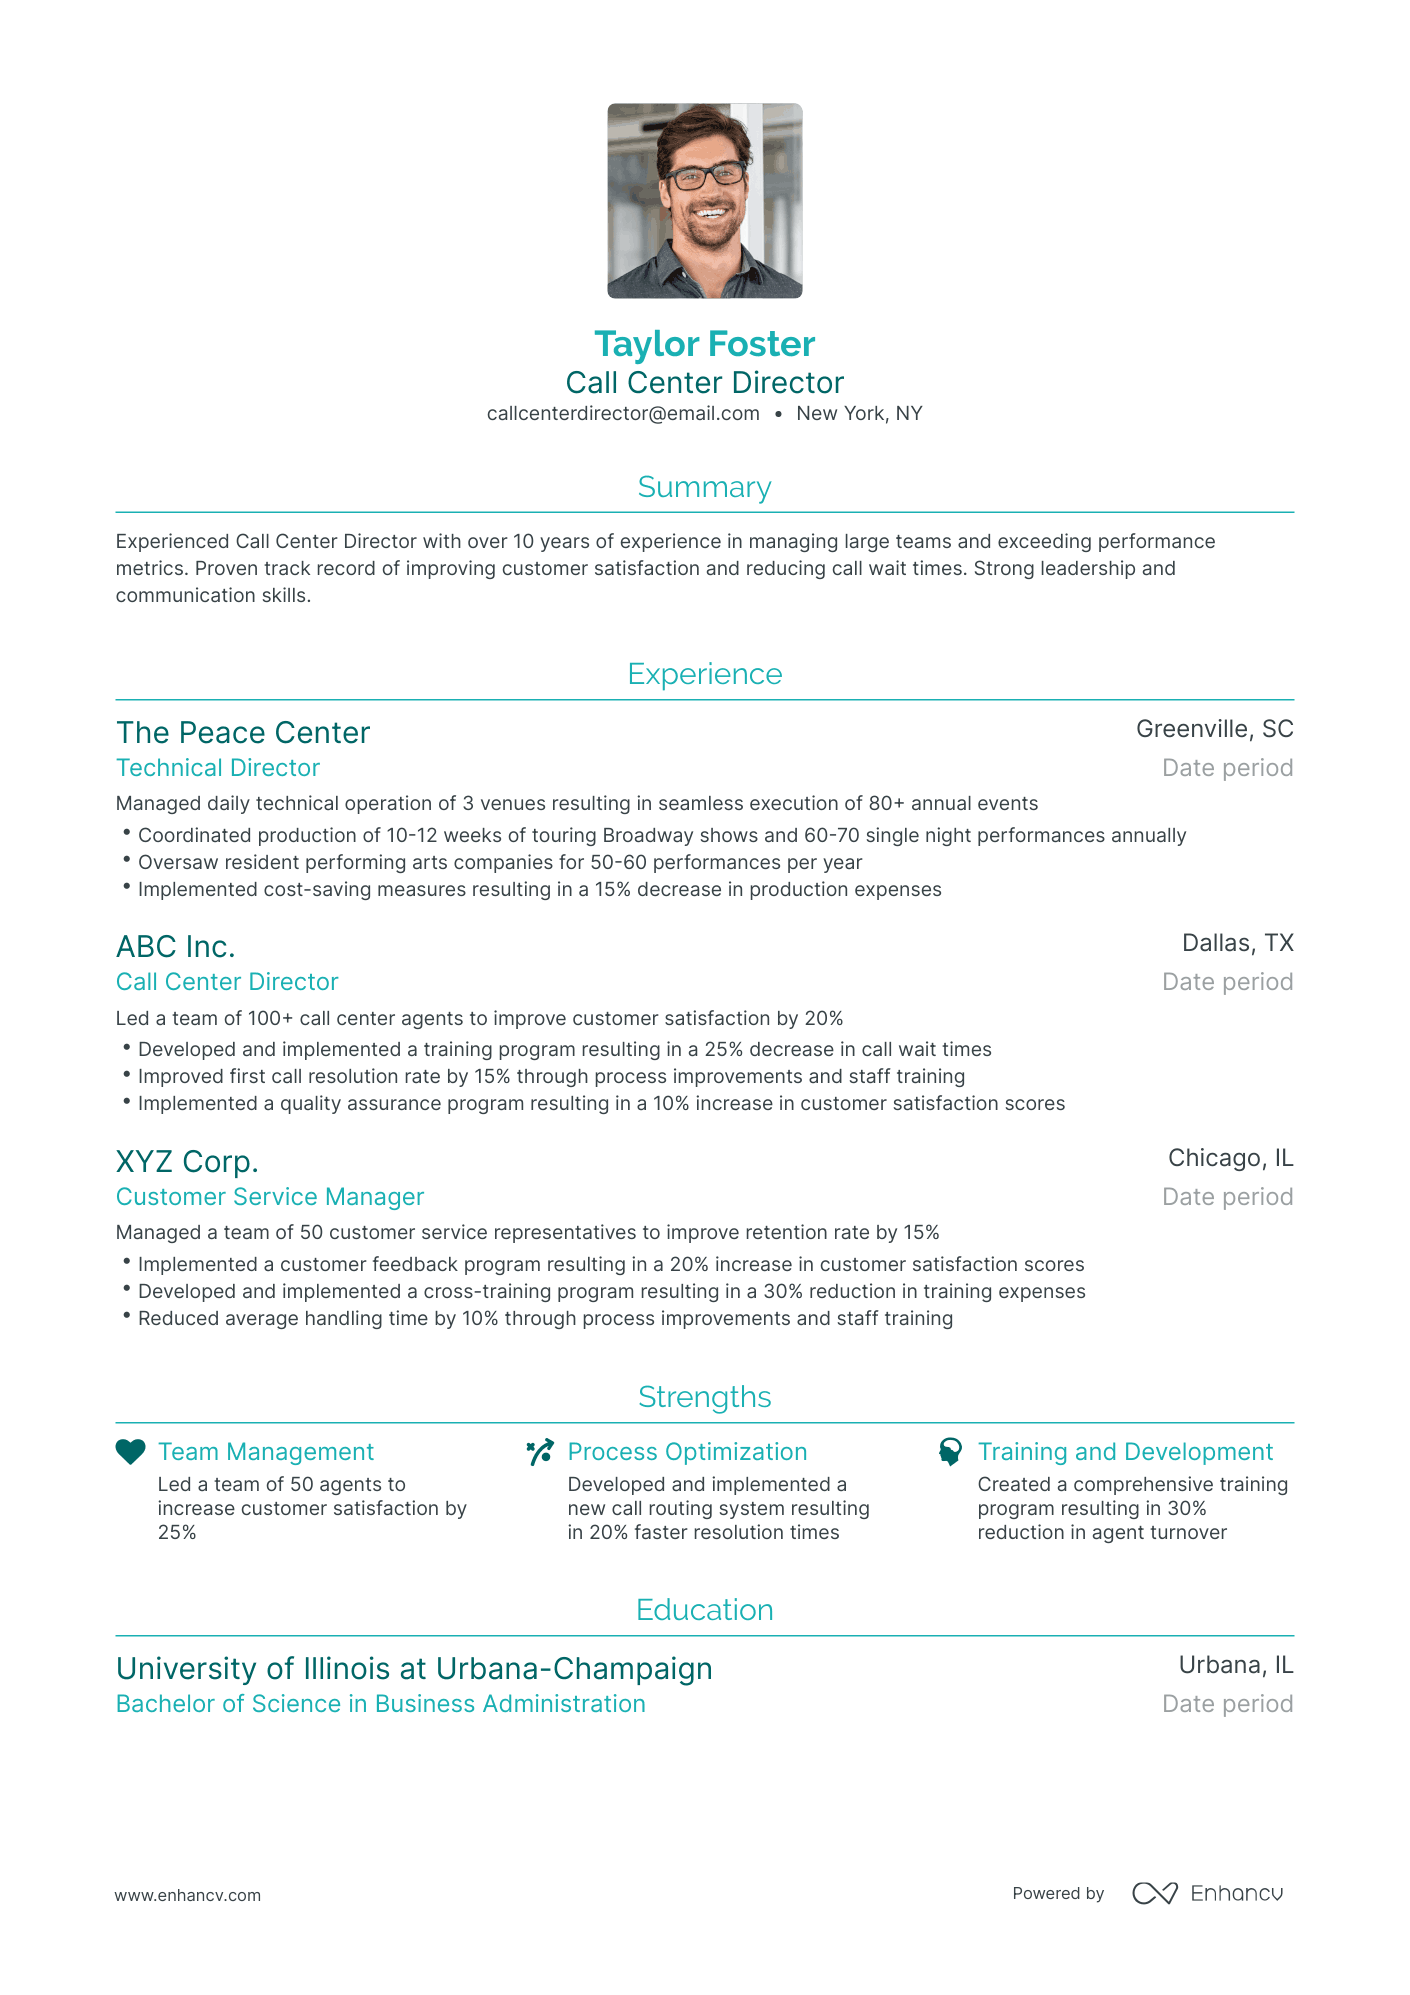 Traditional Call Center Director Resume Template